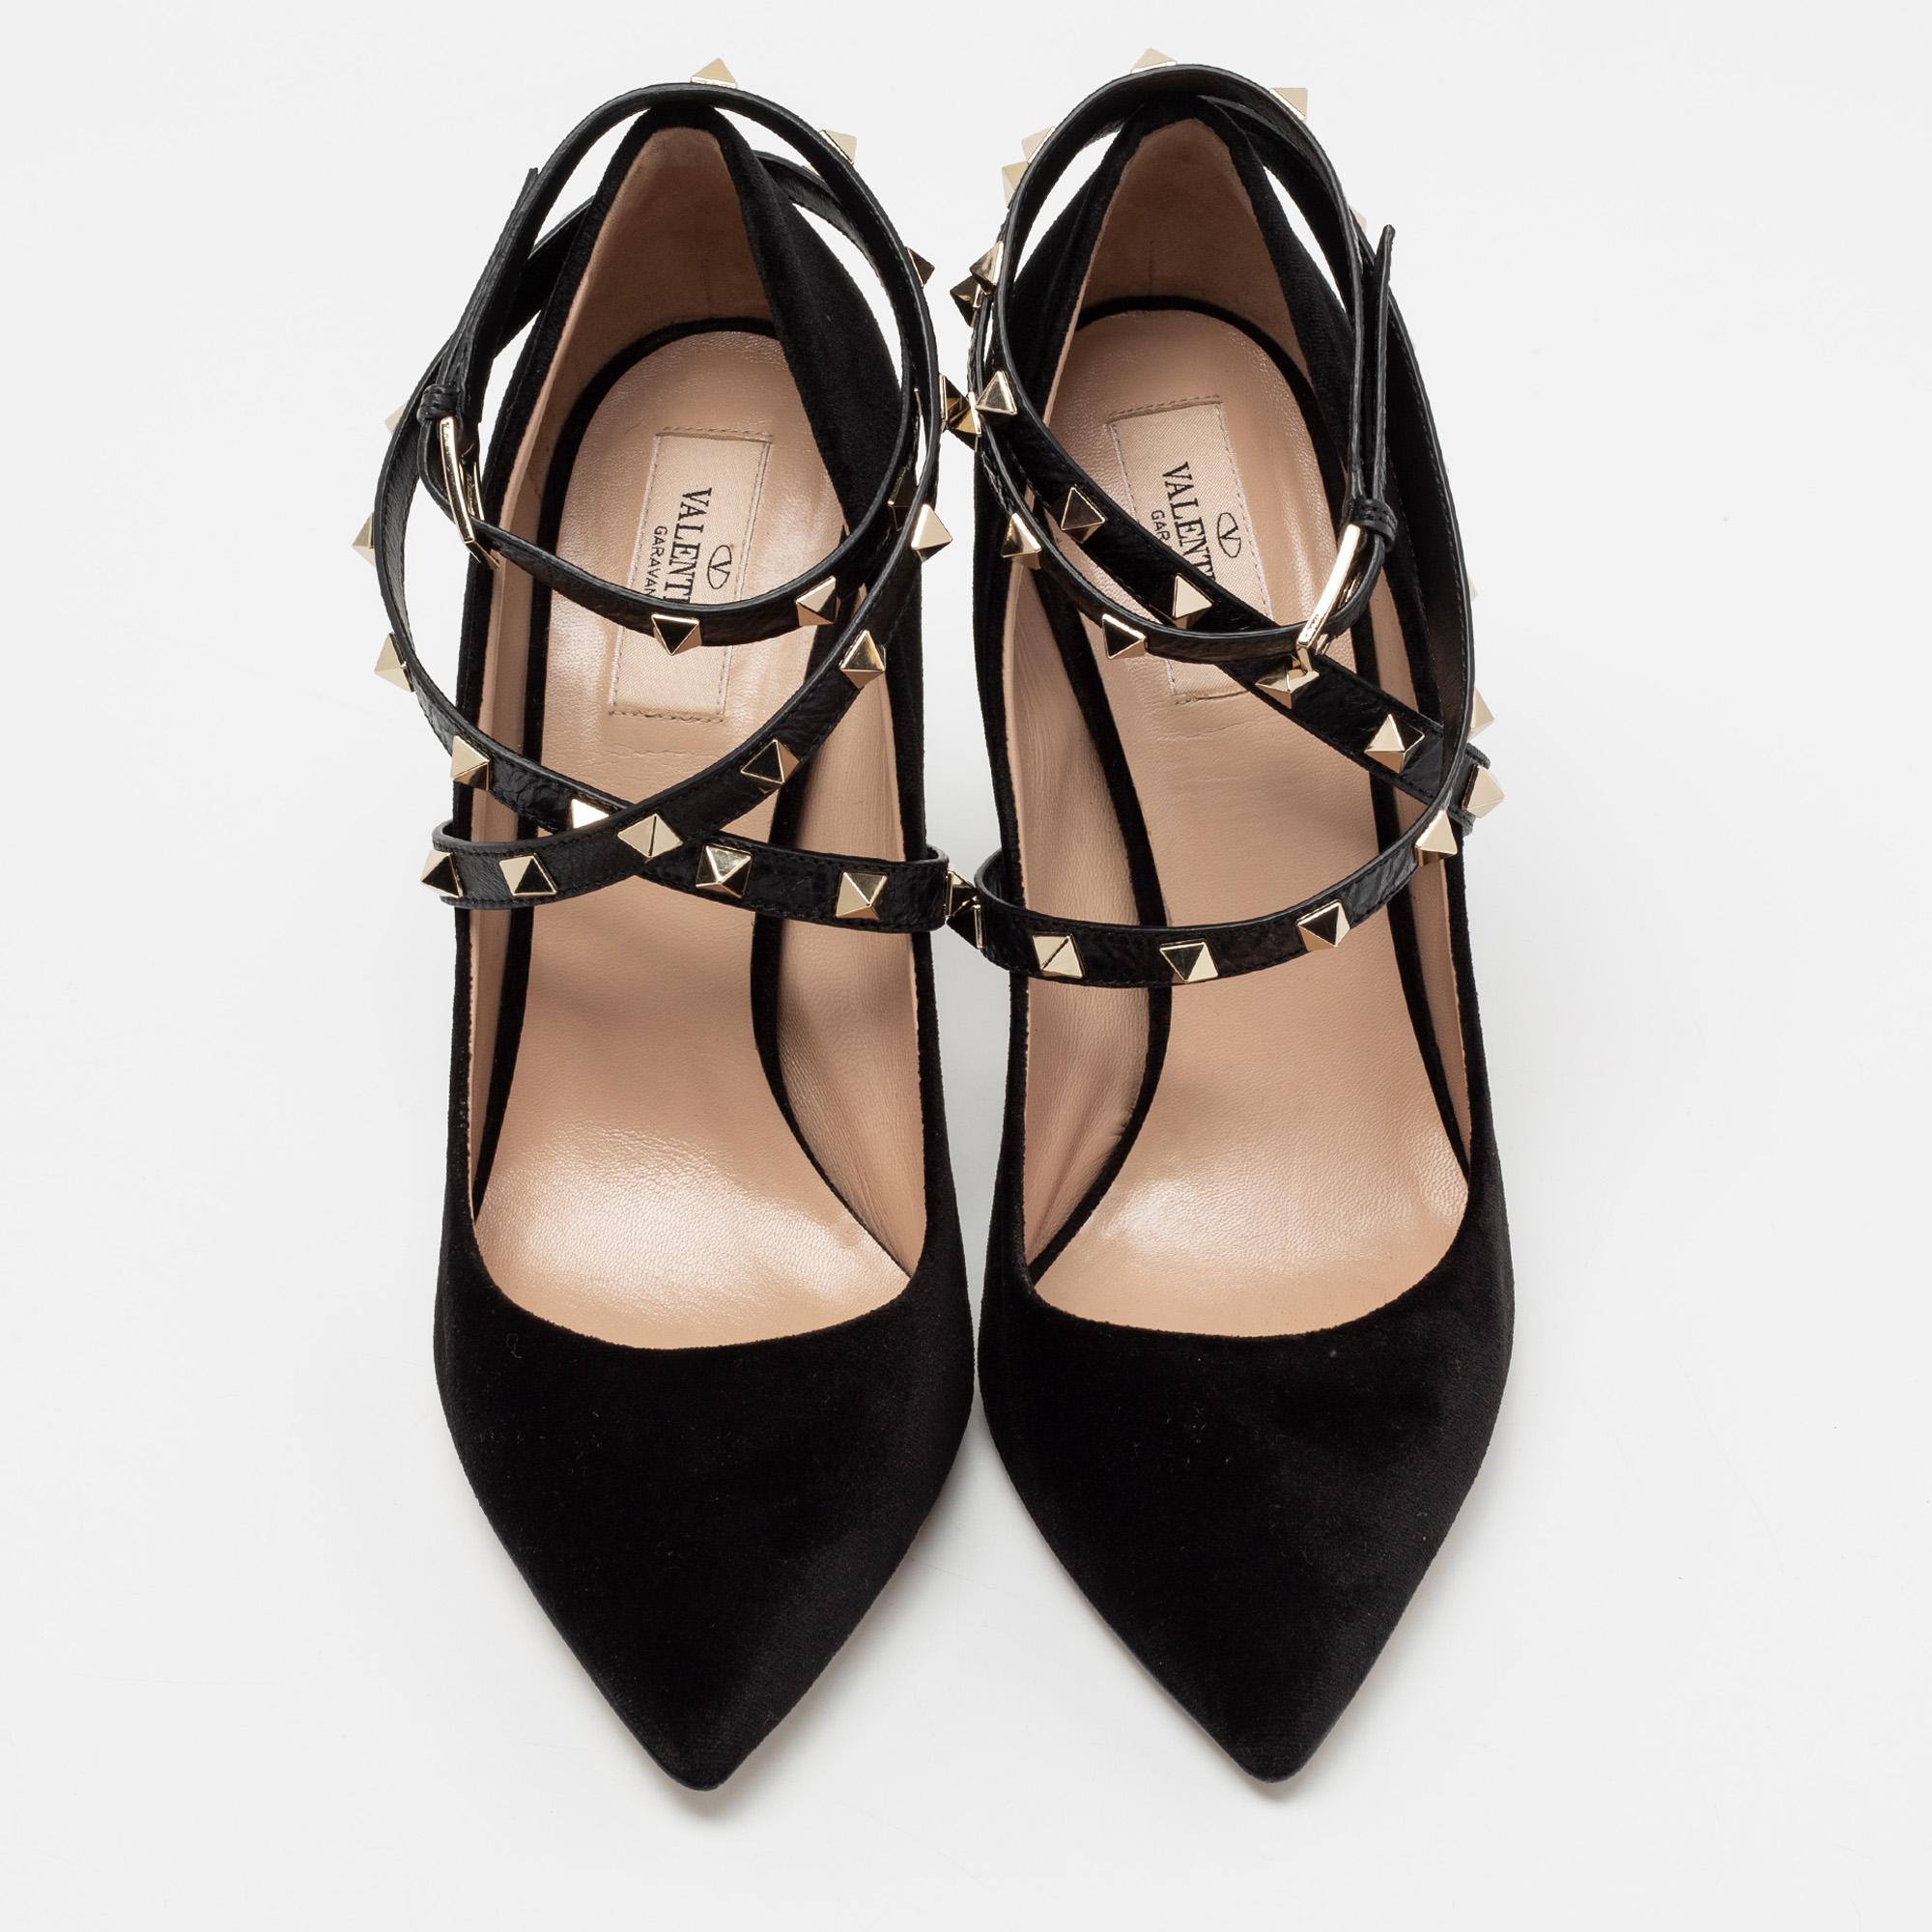 Designed for fashion queens like you, these Valentino black pumps are crafted from plush velvet and leather and are absolutely gorgeous! They come flaunting pointed toes, 11.5 cm heels, and their signature Rockstuds on the multiple ankle